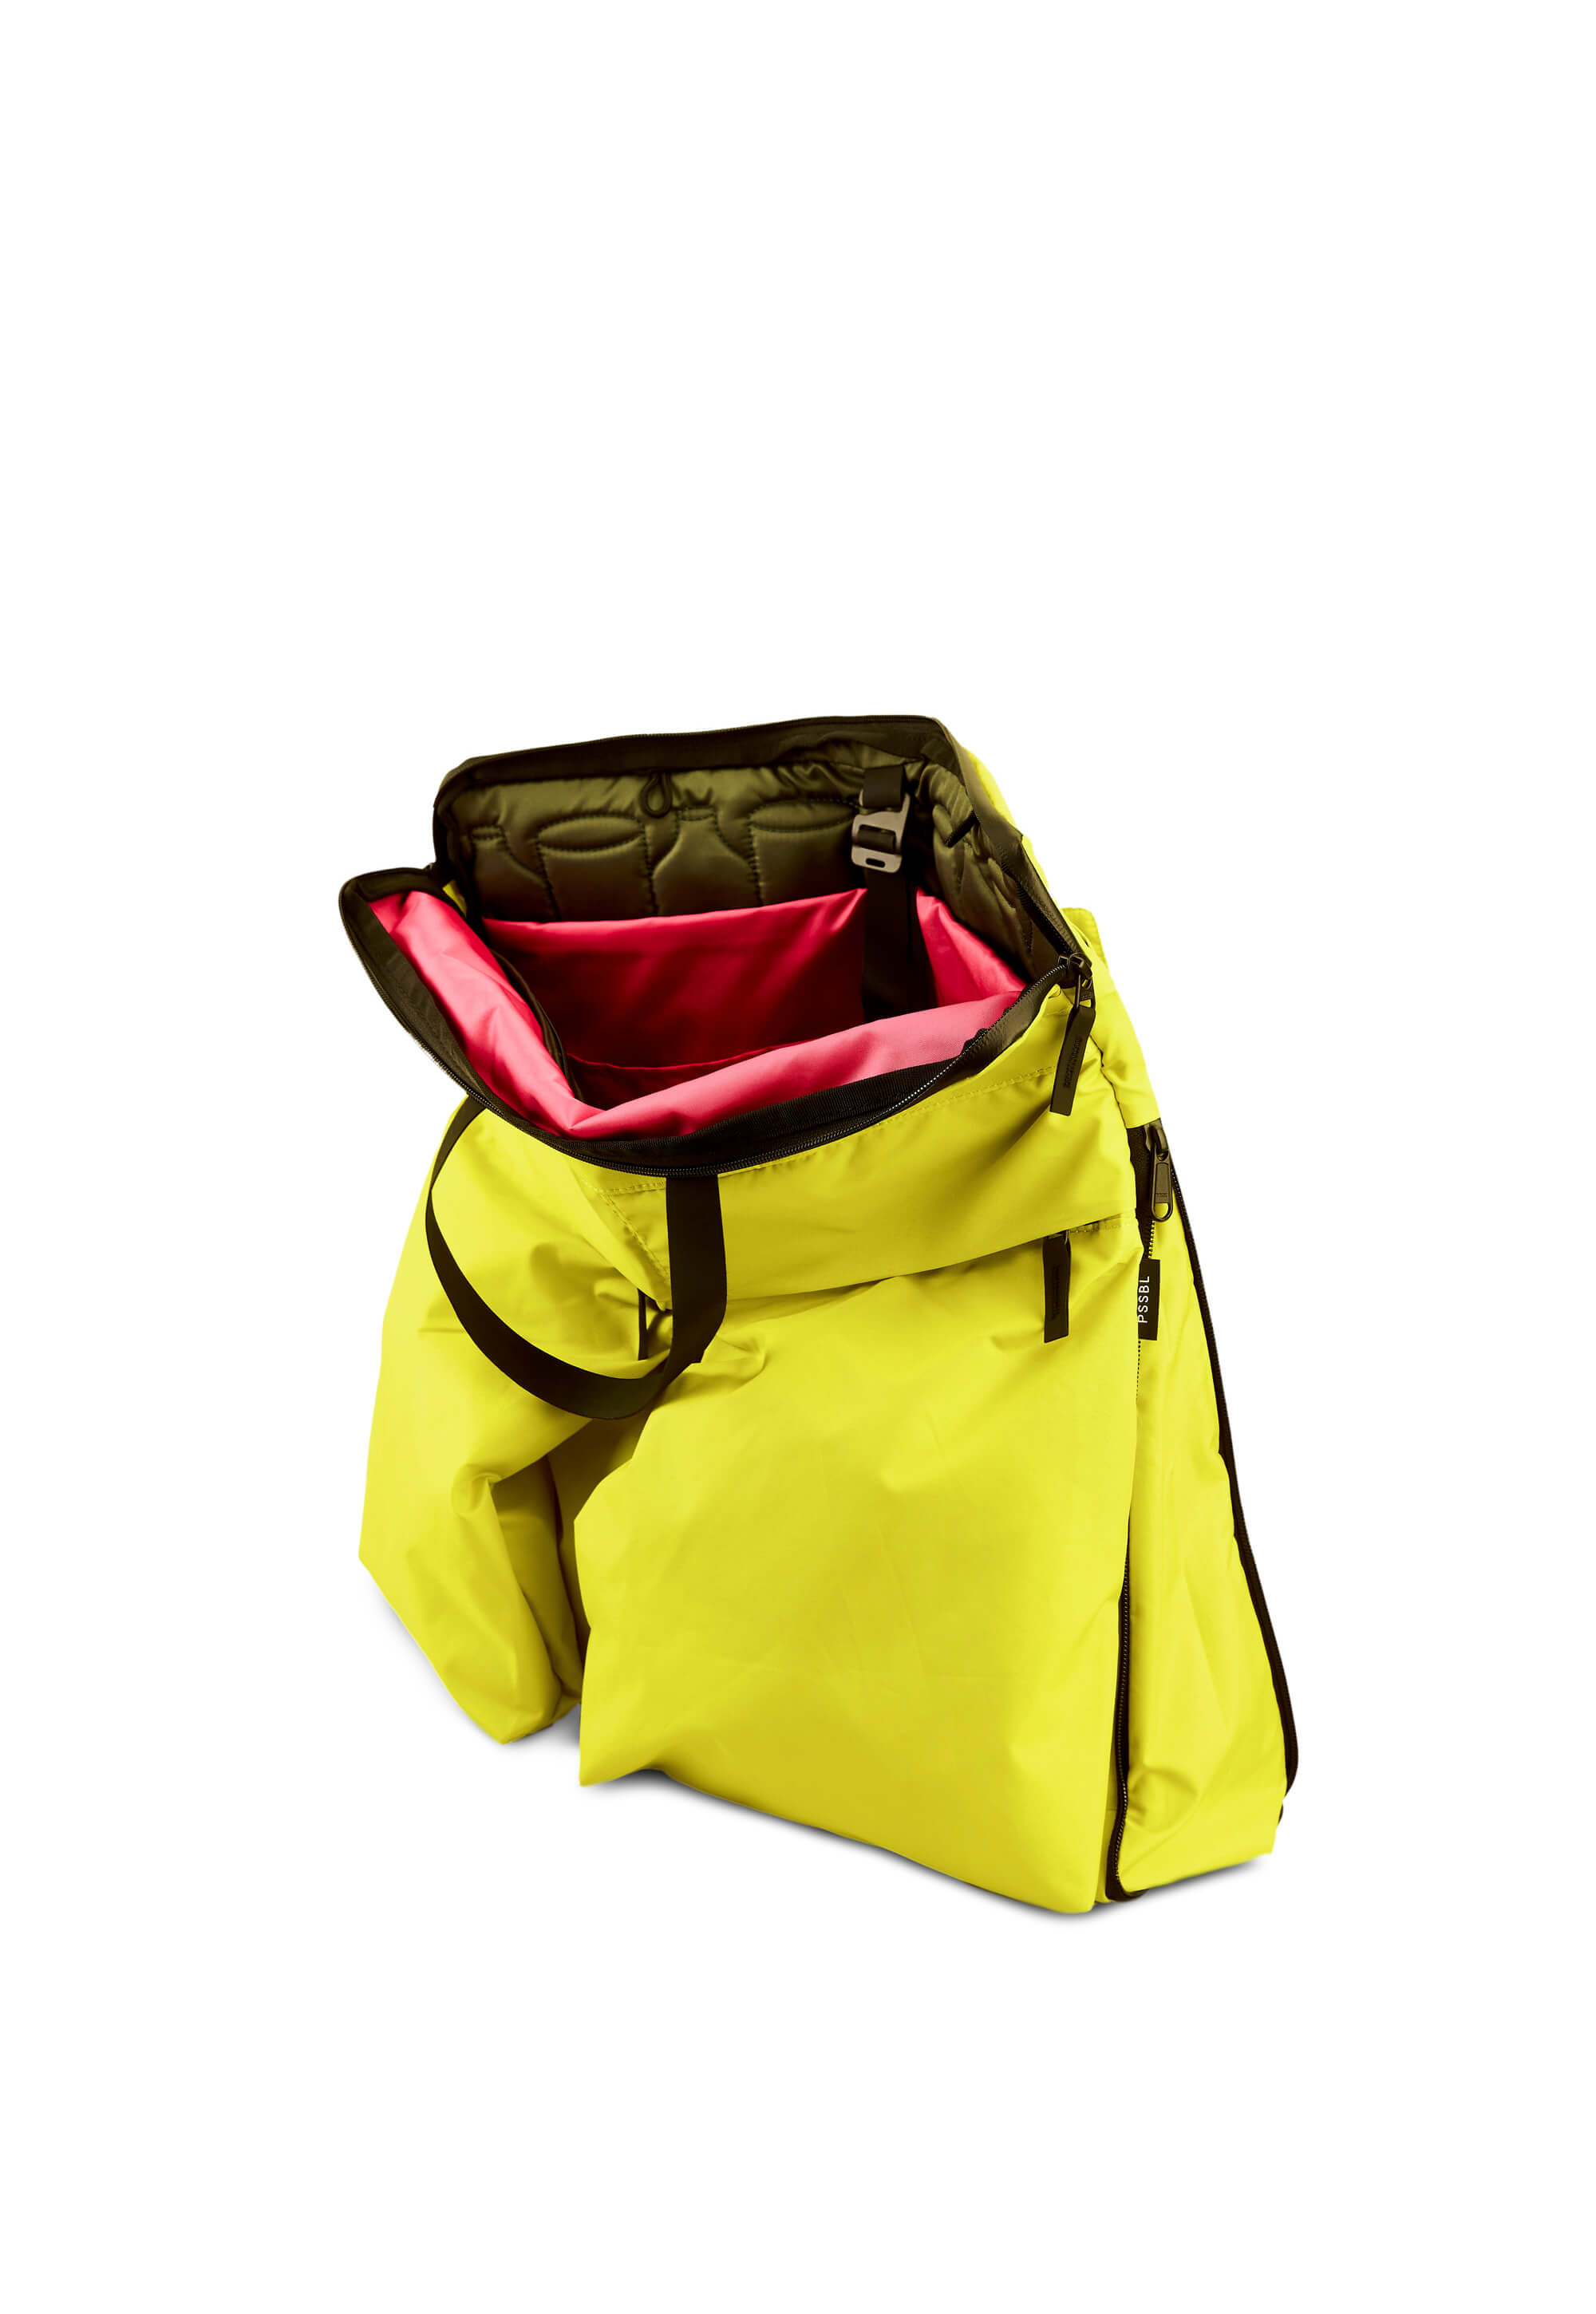 PSSBL Tasche The Tote urban yellow